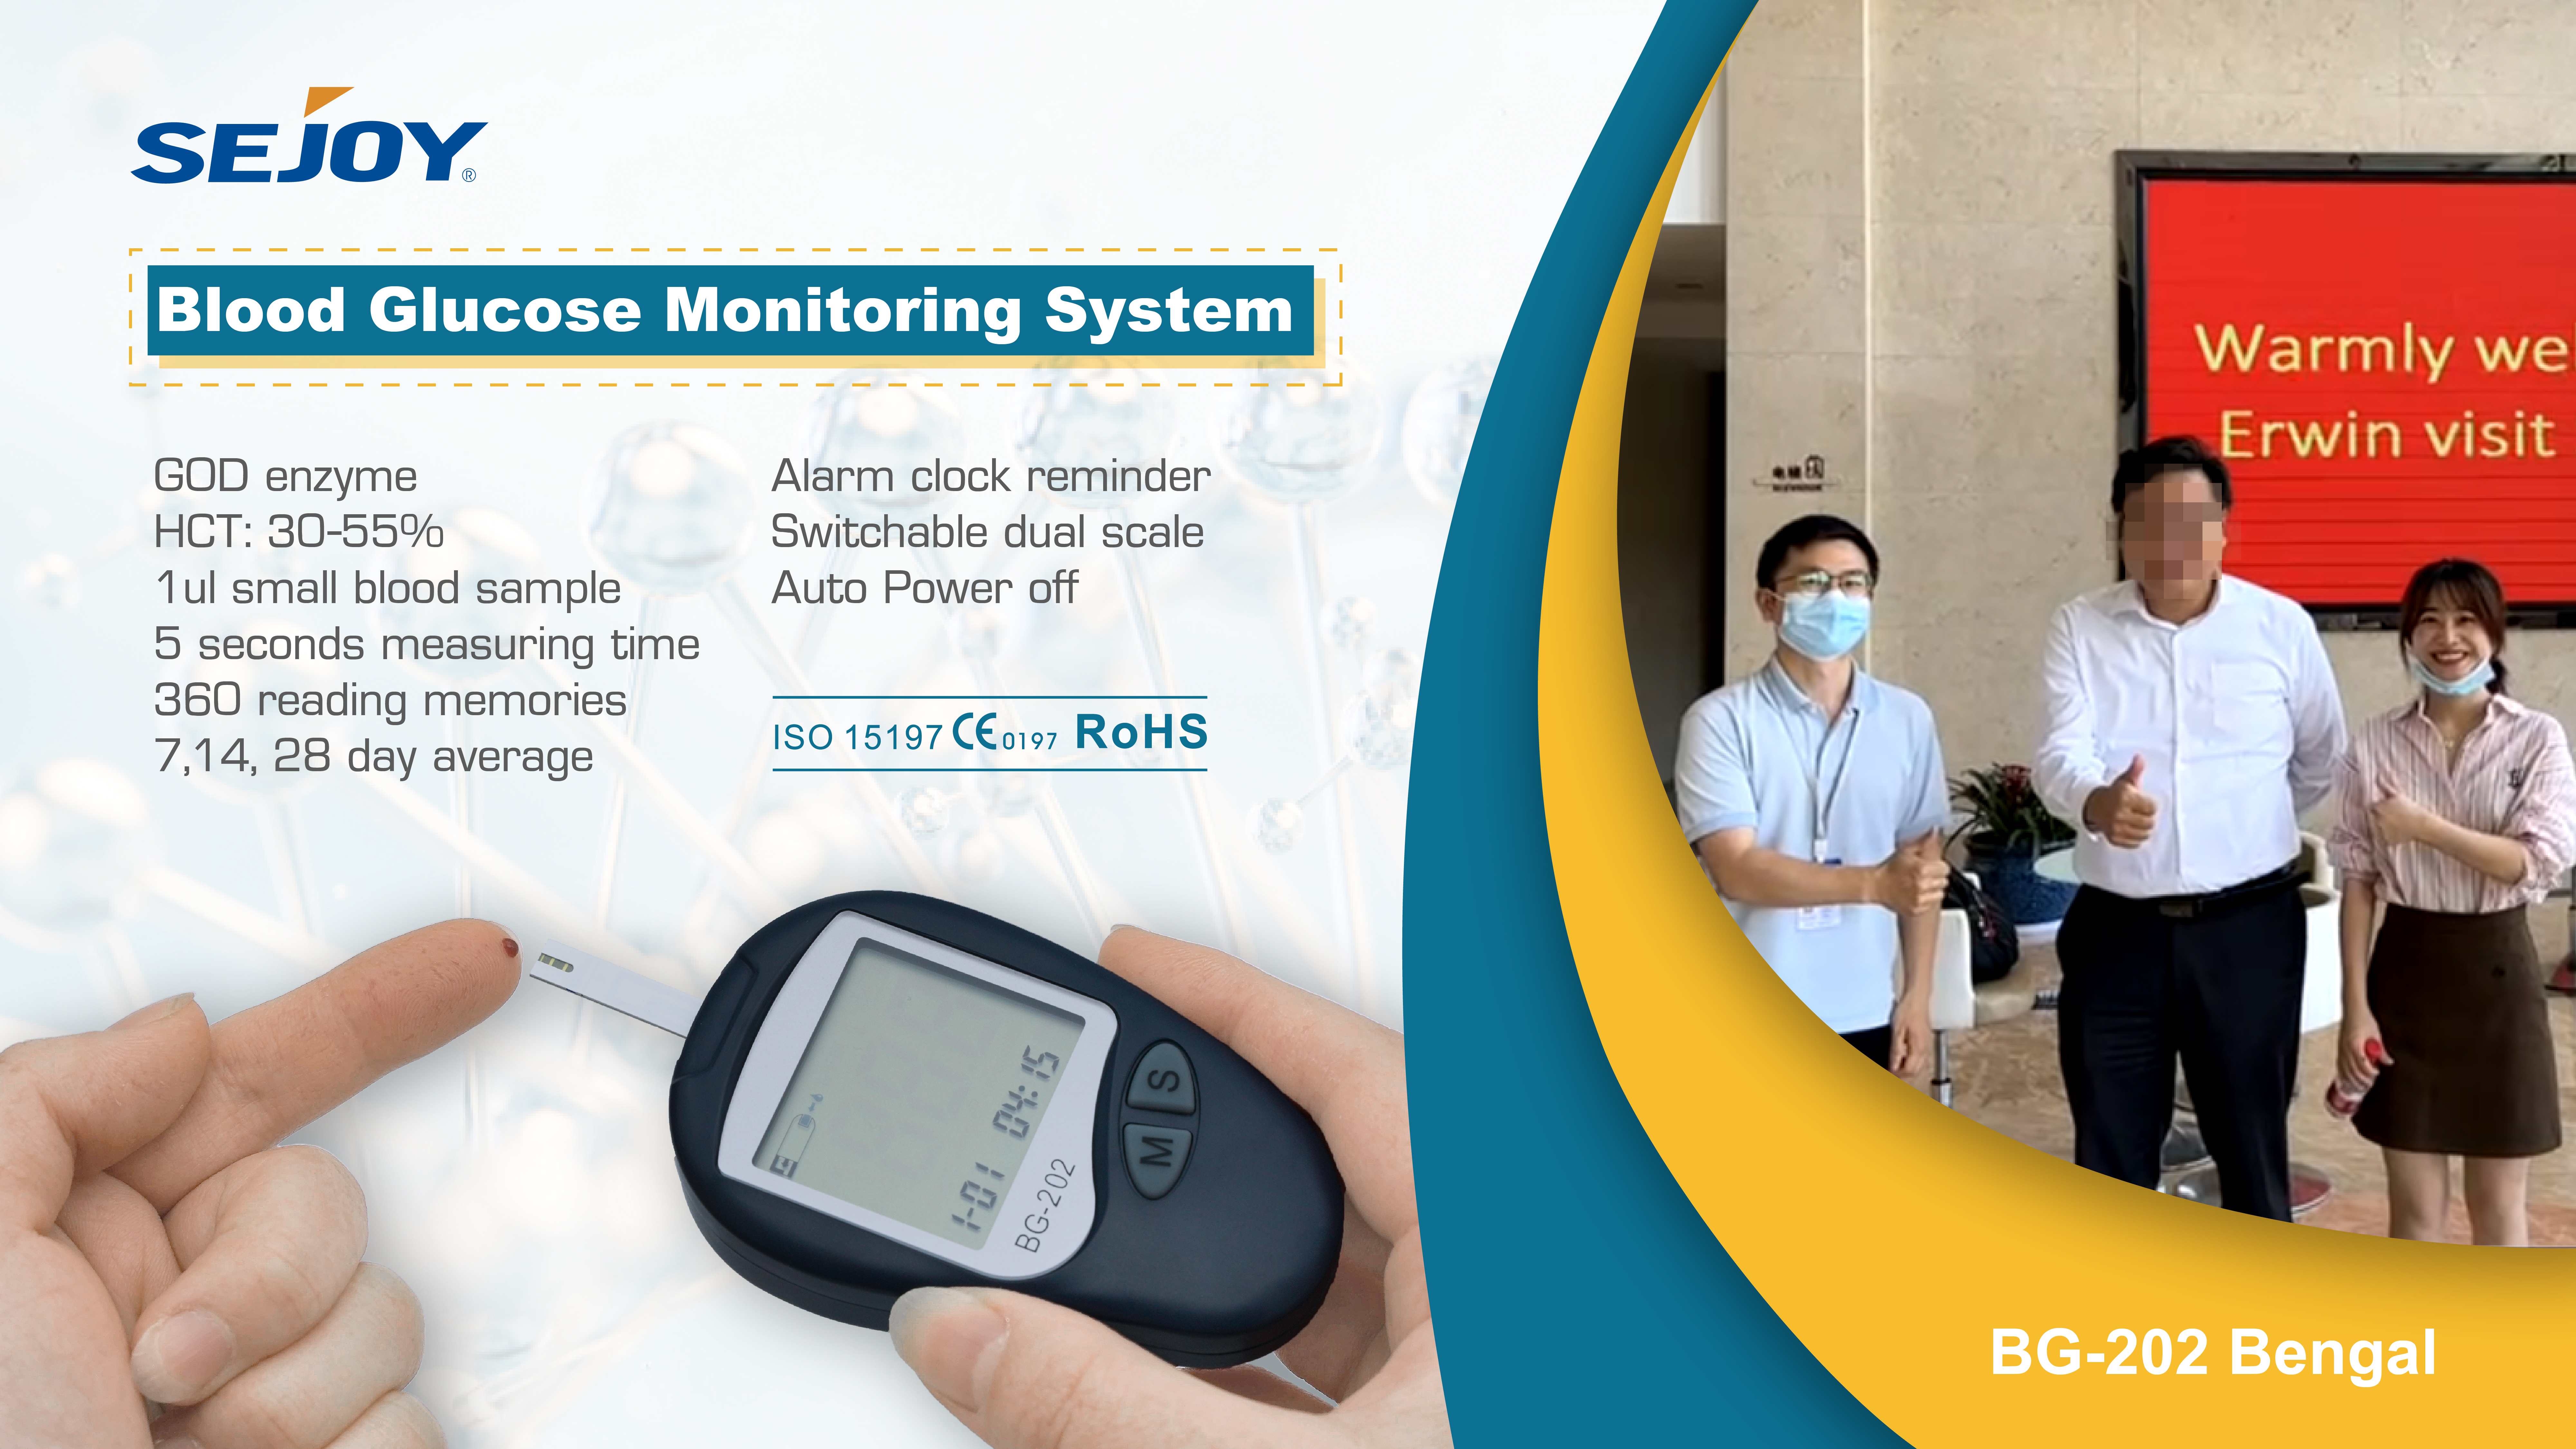 https://www.sejoy.com/blood-glucose-monitoring-system-202-product/